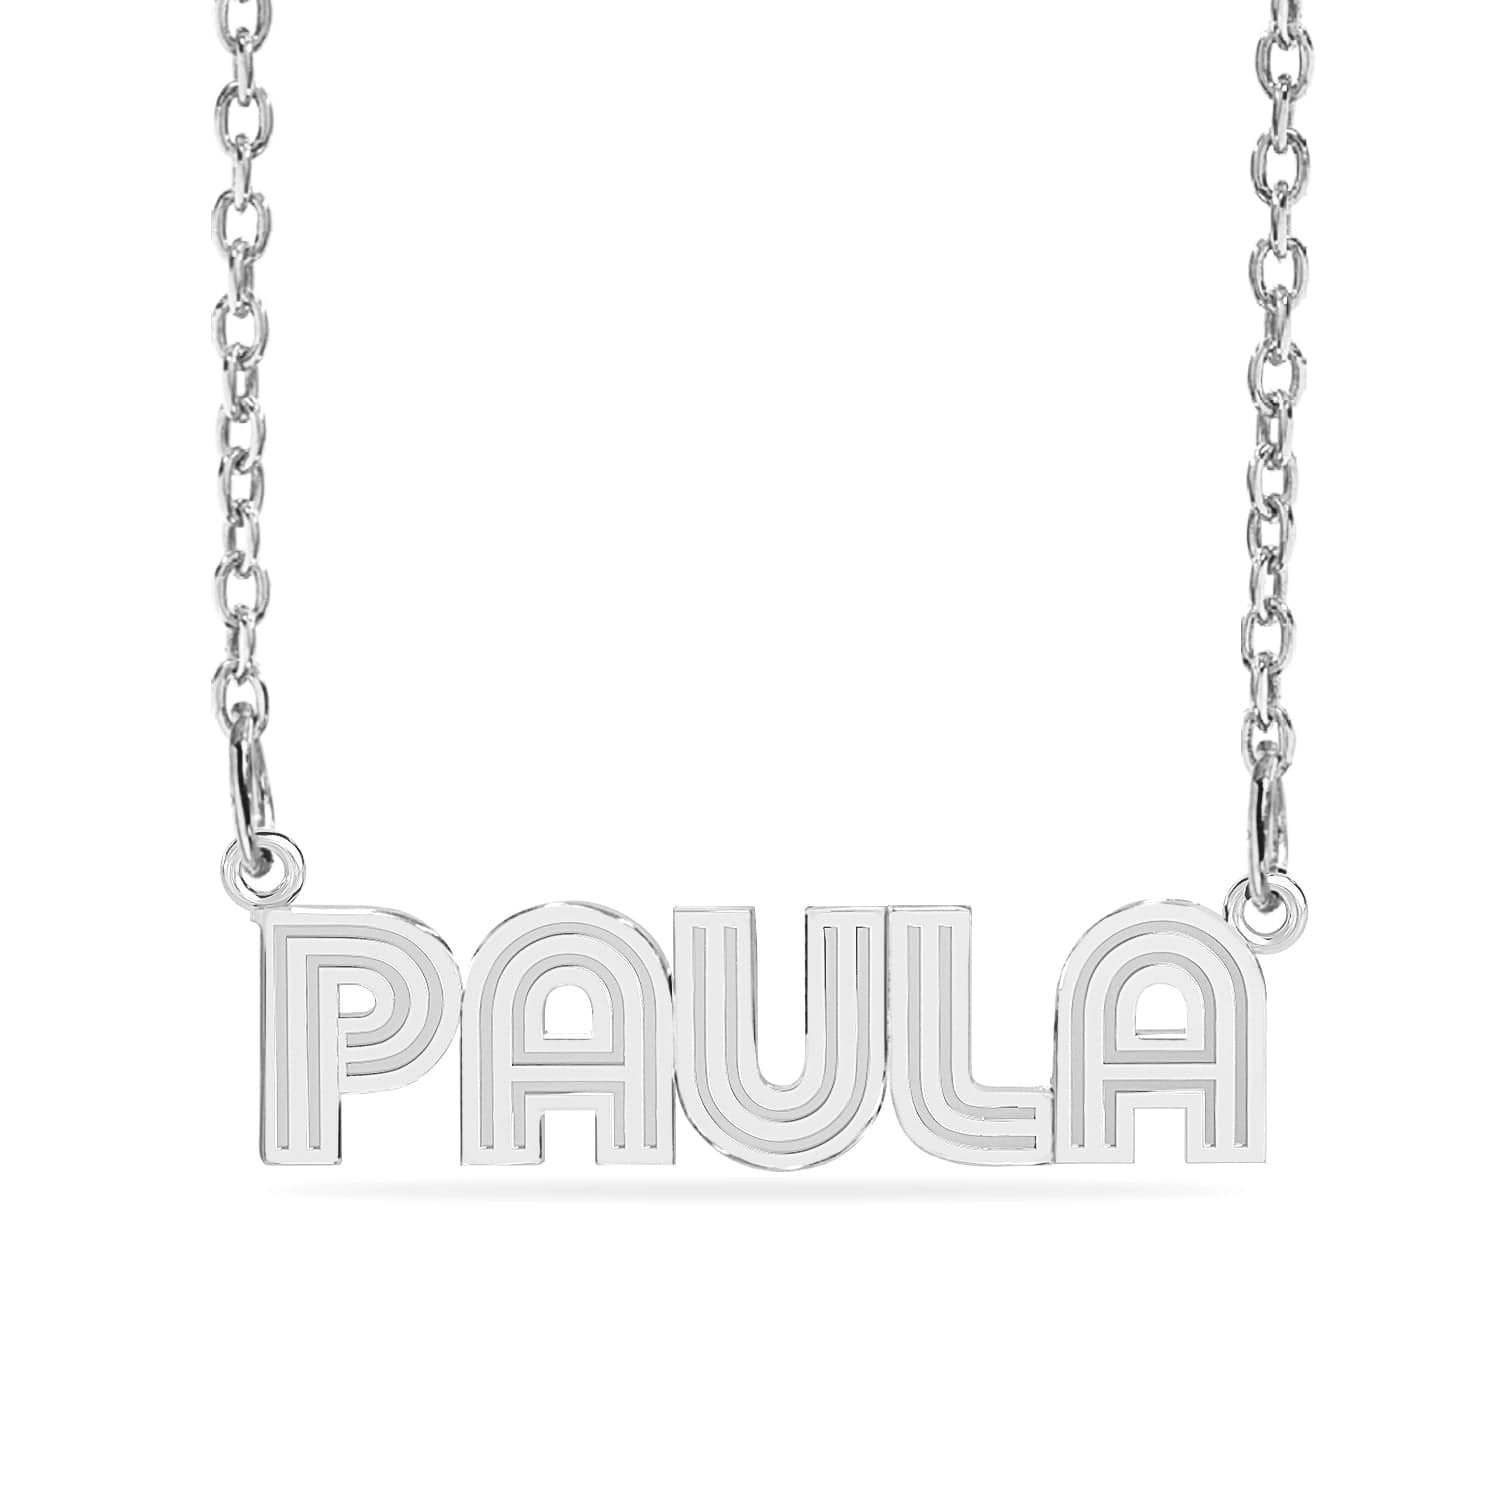 14k Gold over Sterling Silver / Link Chain Copy of Personalized Name necklace with Diamond Cut "Sekani"